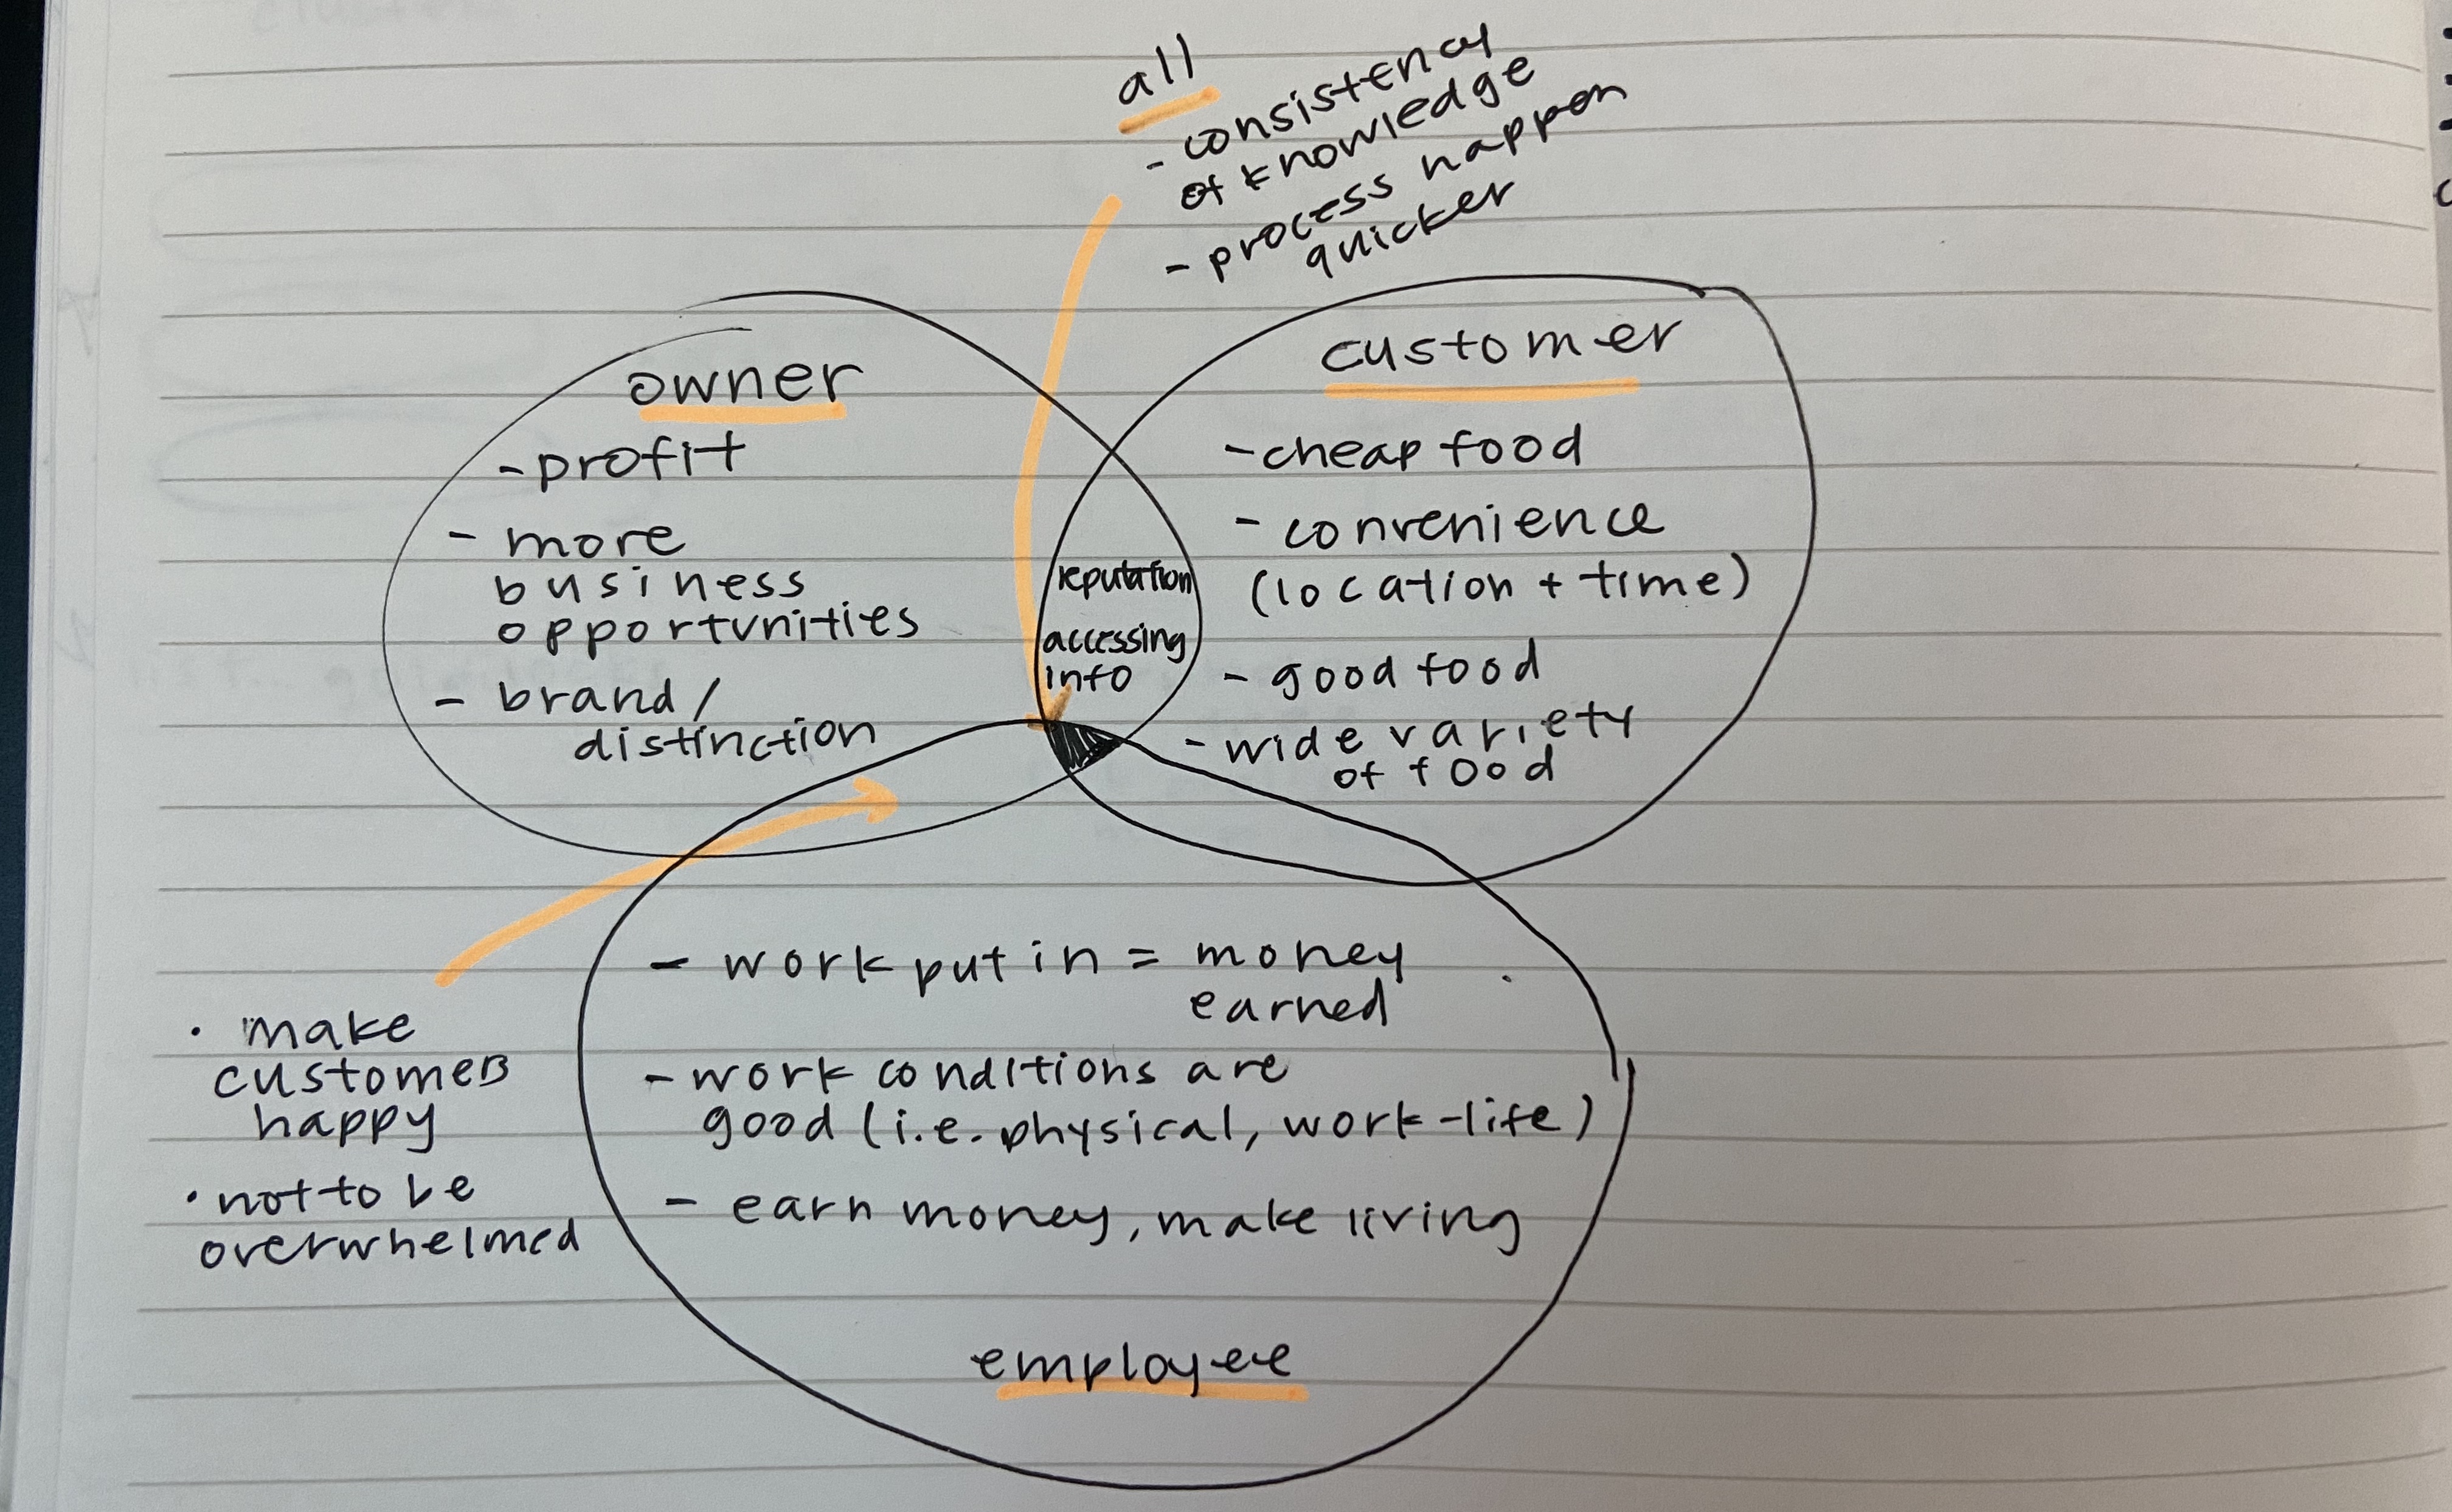 Venn diagram used to synthesize information from prev research